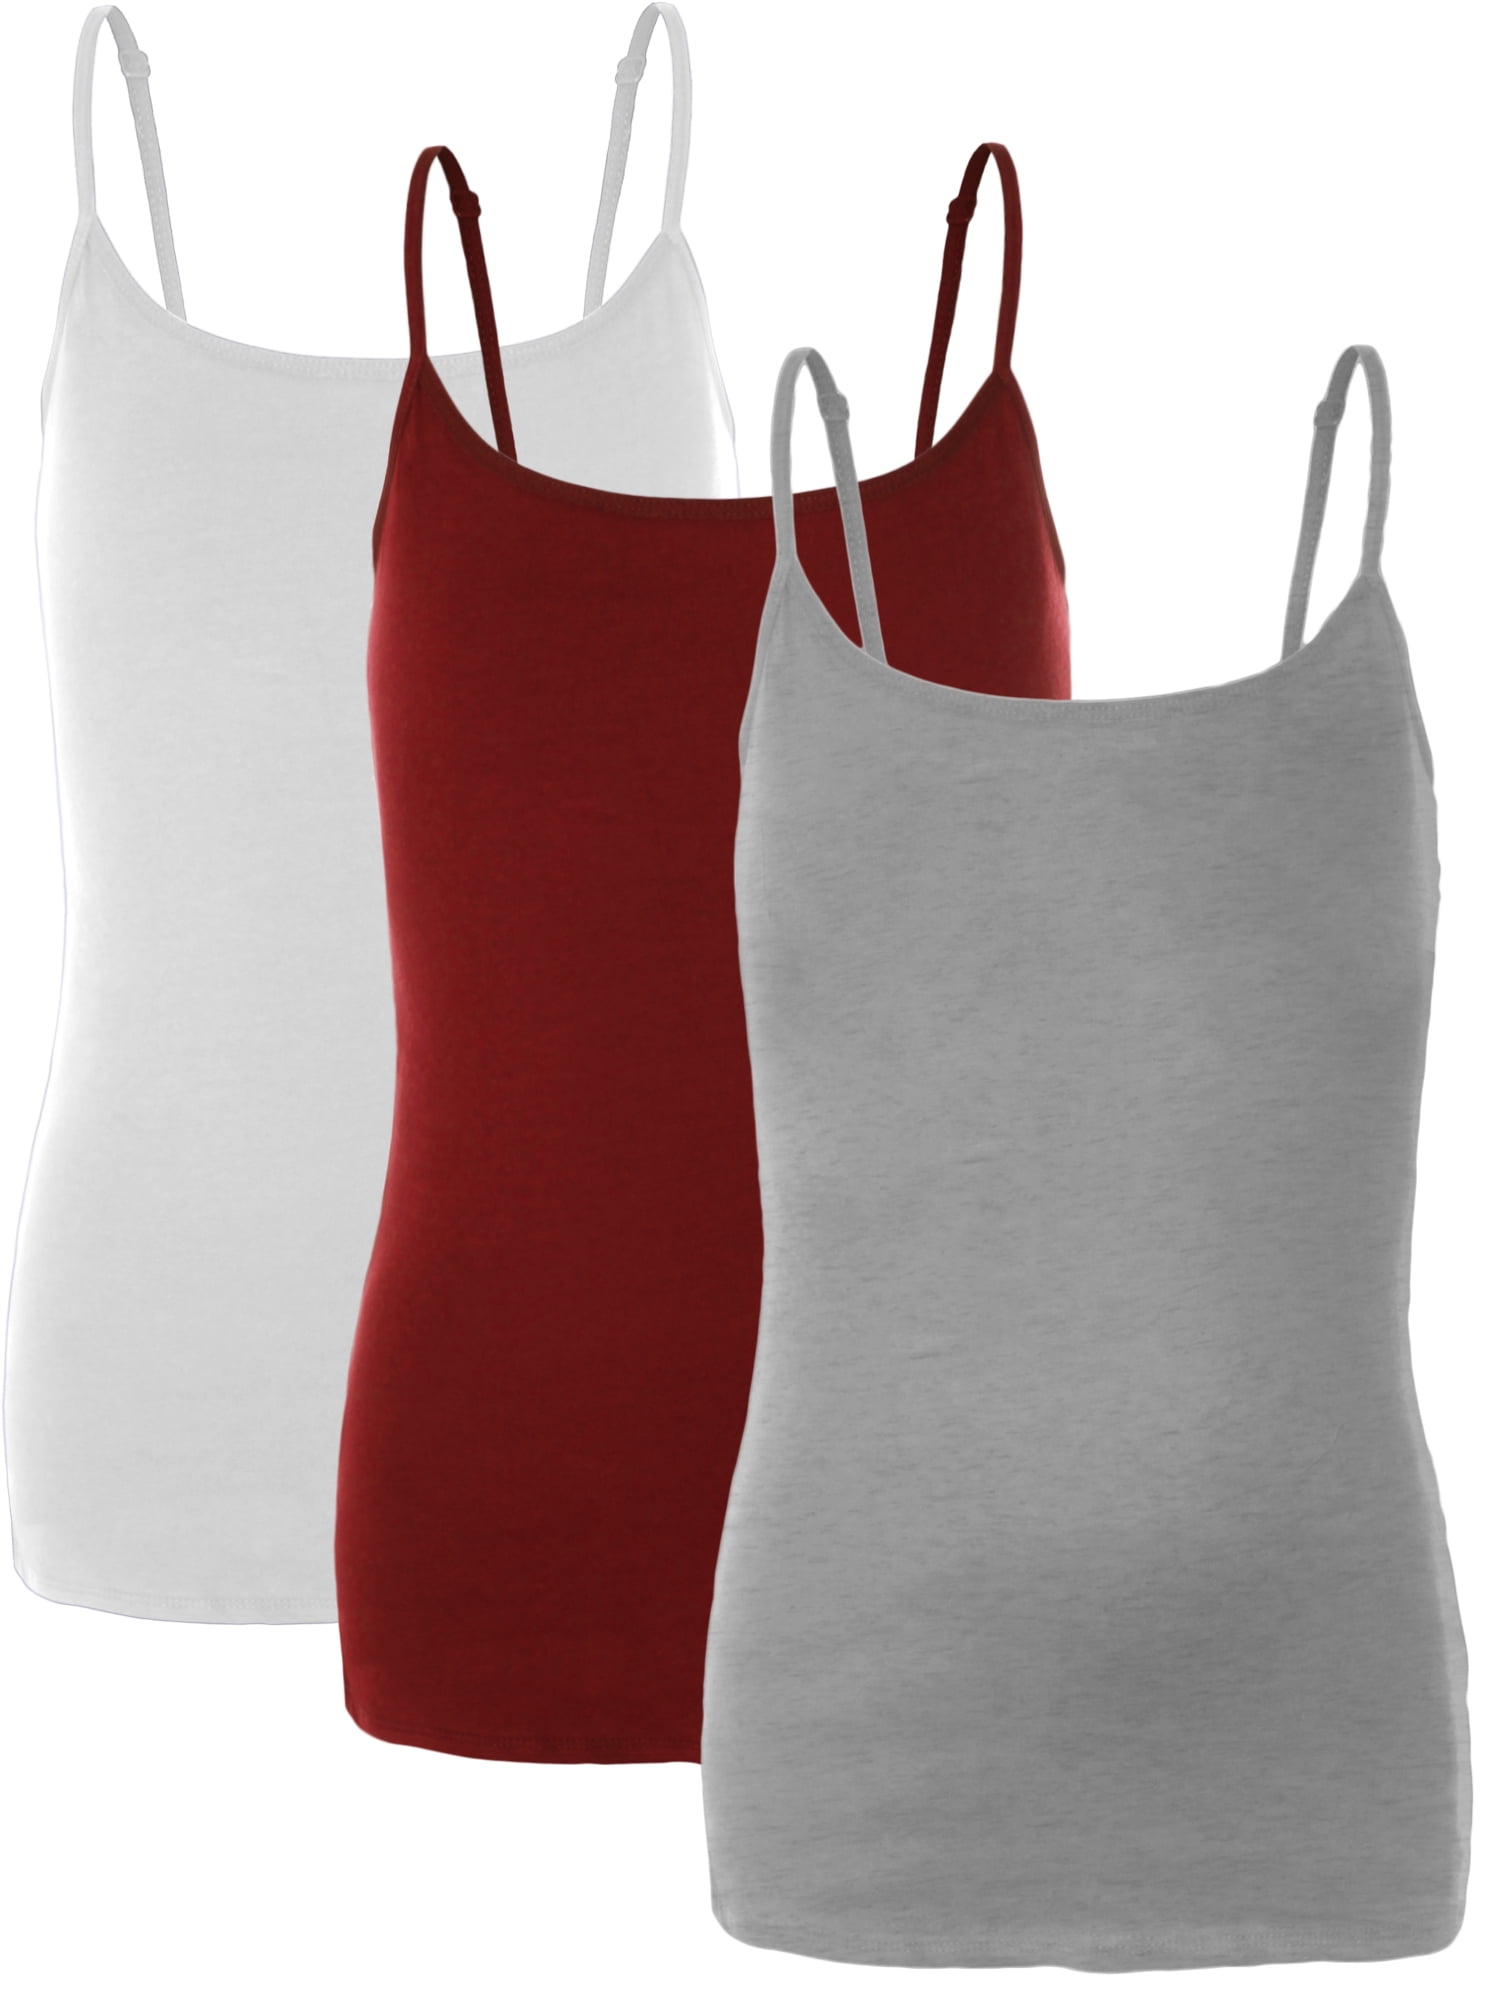 Emmalise PreTeen Training Bra Camisole Wireless Built in Fabric Support  Cami (3Pk White, Red, H Gray, Small, 60-90 lbs)